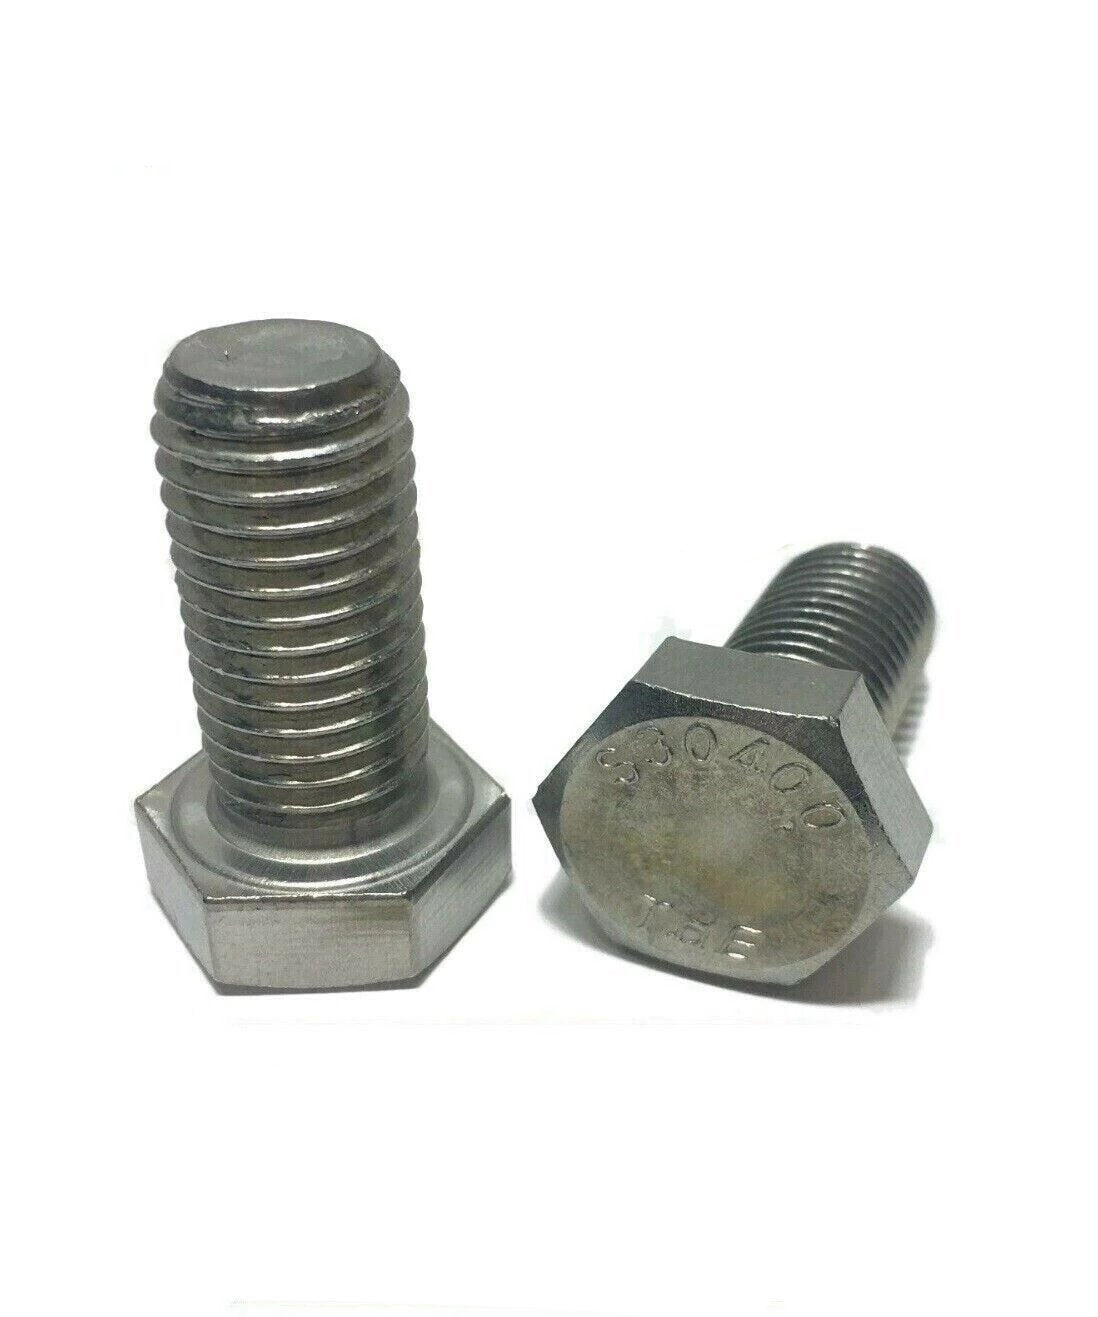 5/8-11 x 1" StaInless Steel Hex Cap Screw / Tap Bolt 18-8 / 304